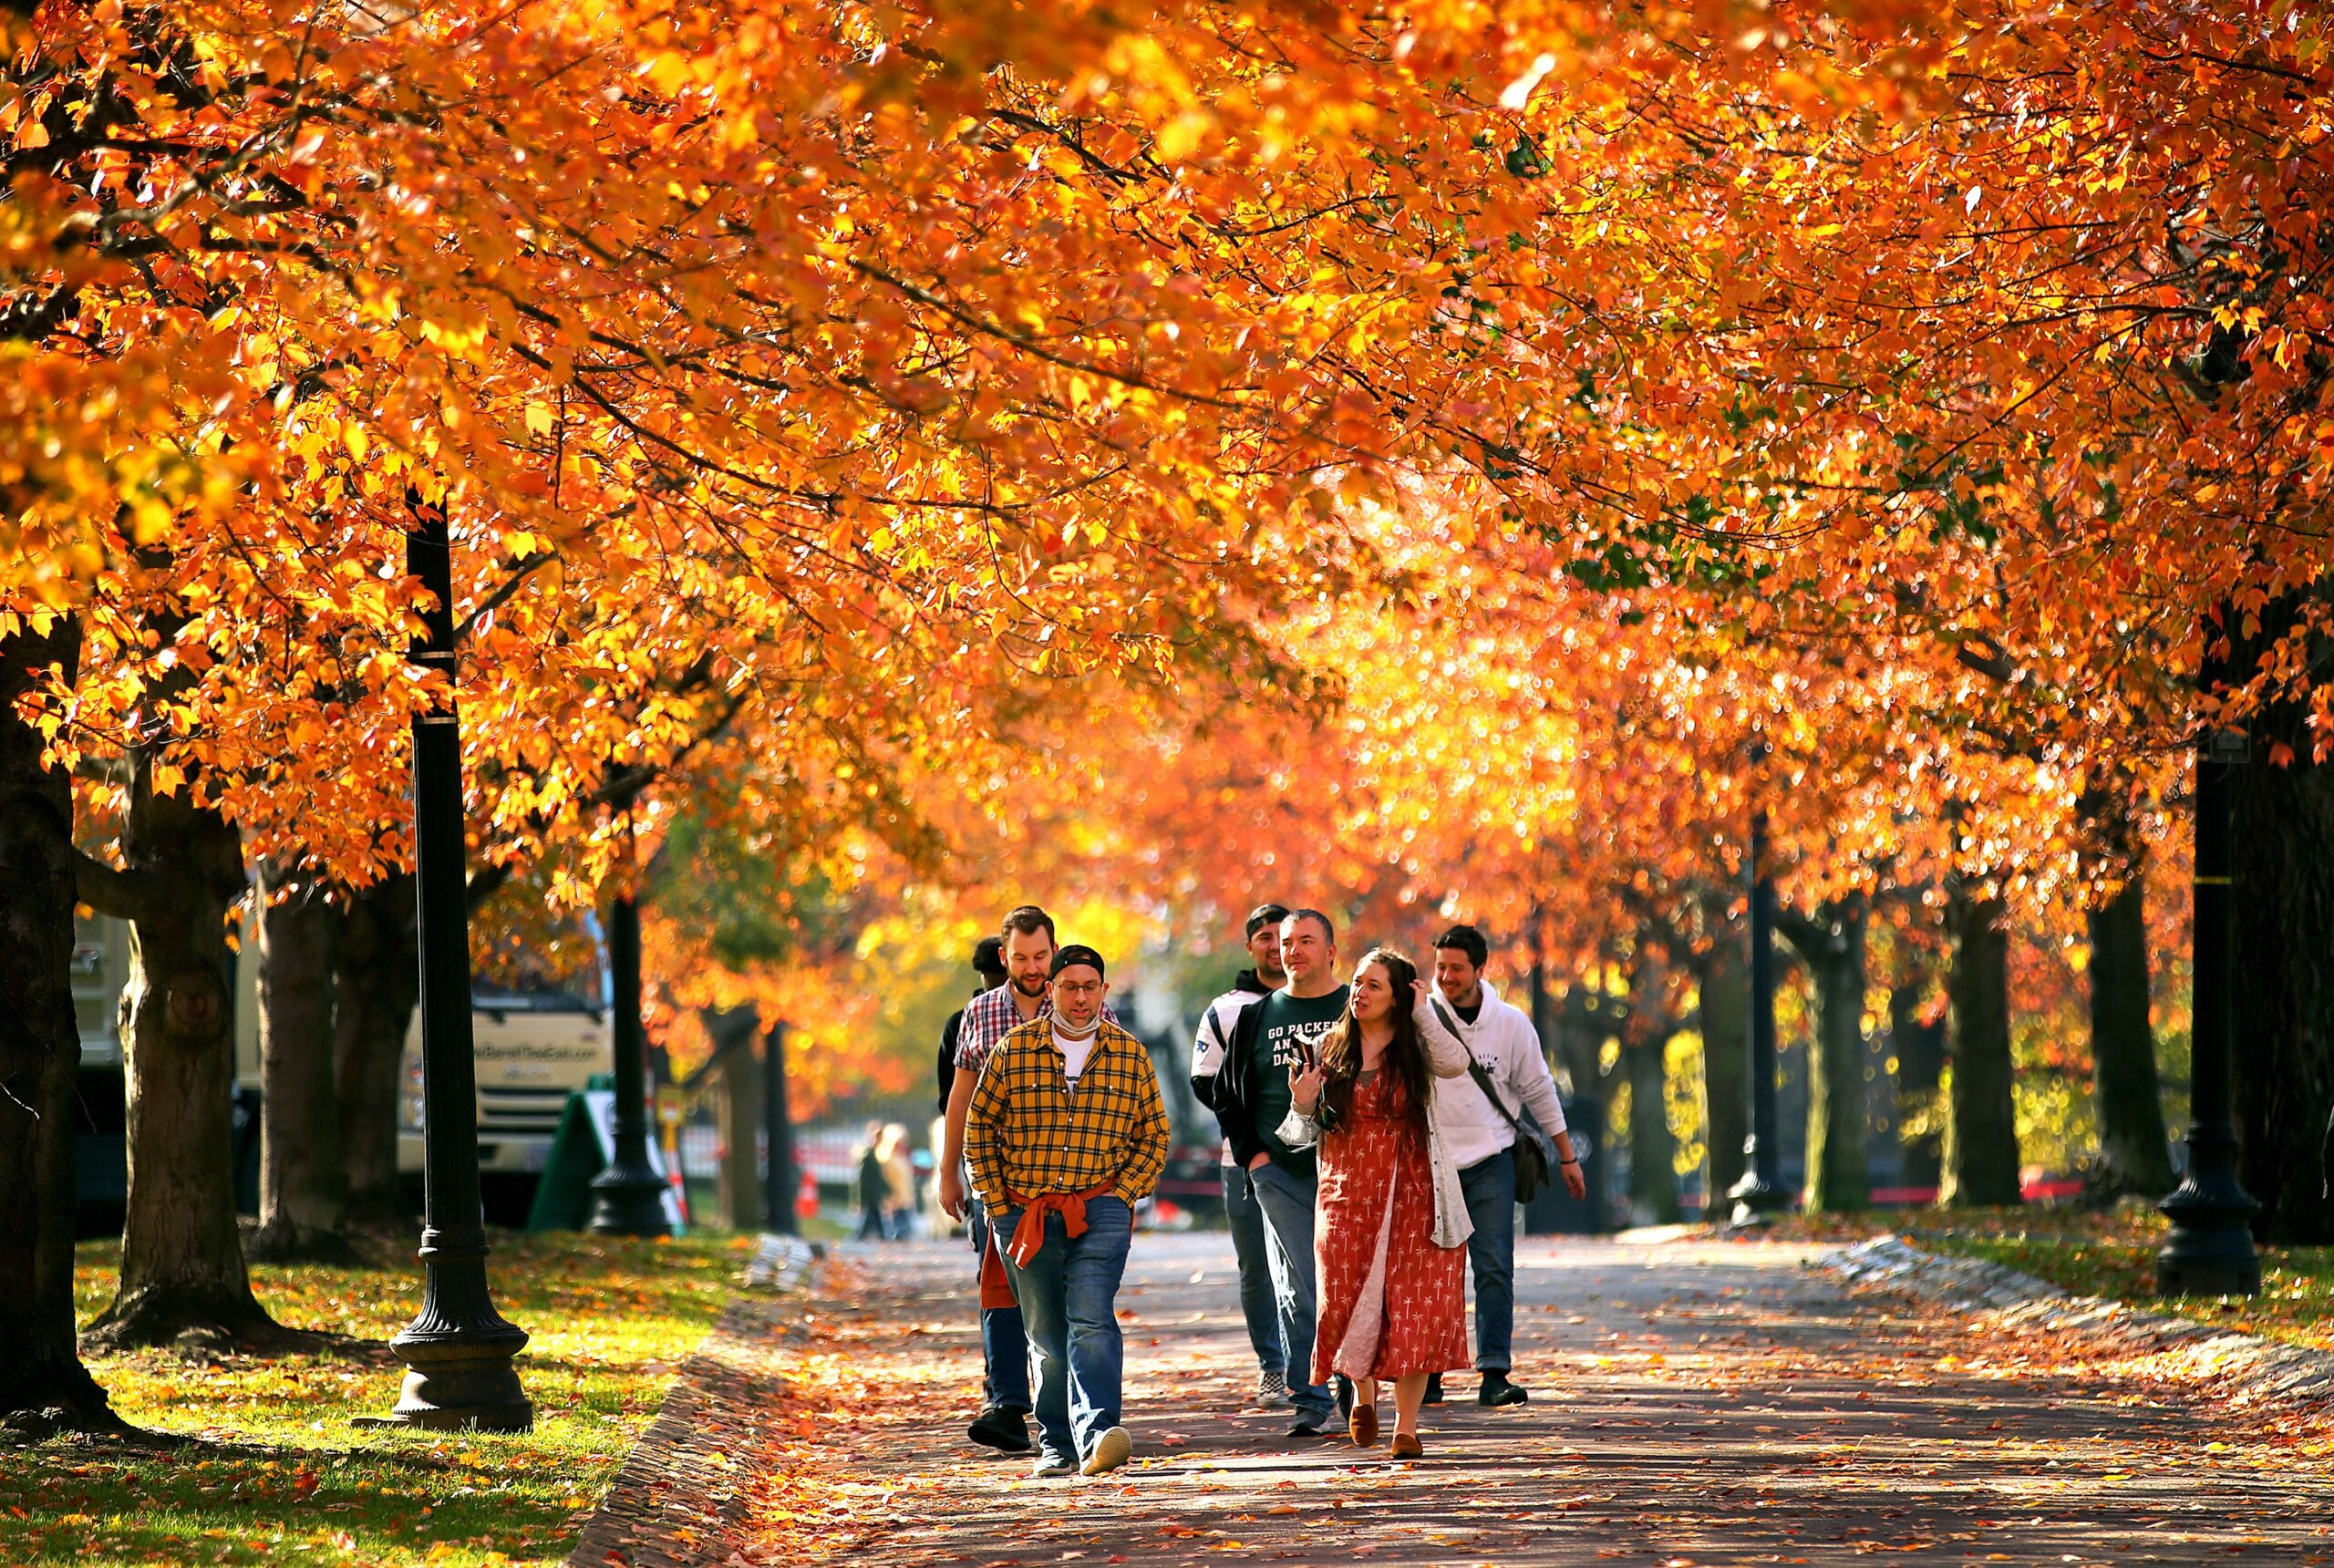 12 Bostonians share their favorite leaf peeping spots in New England